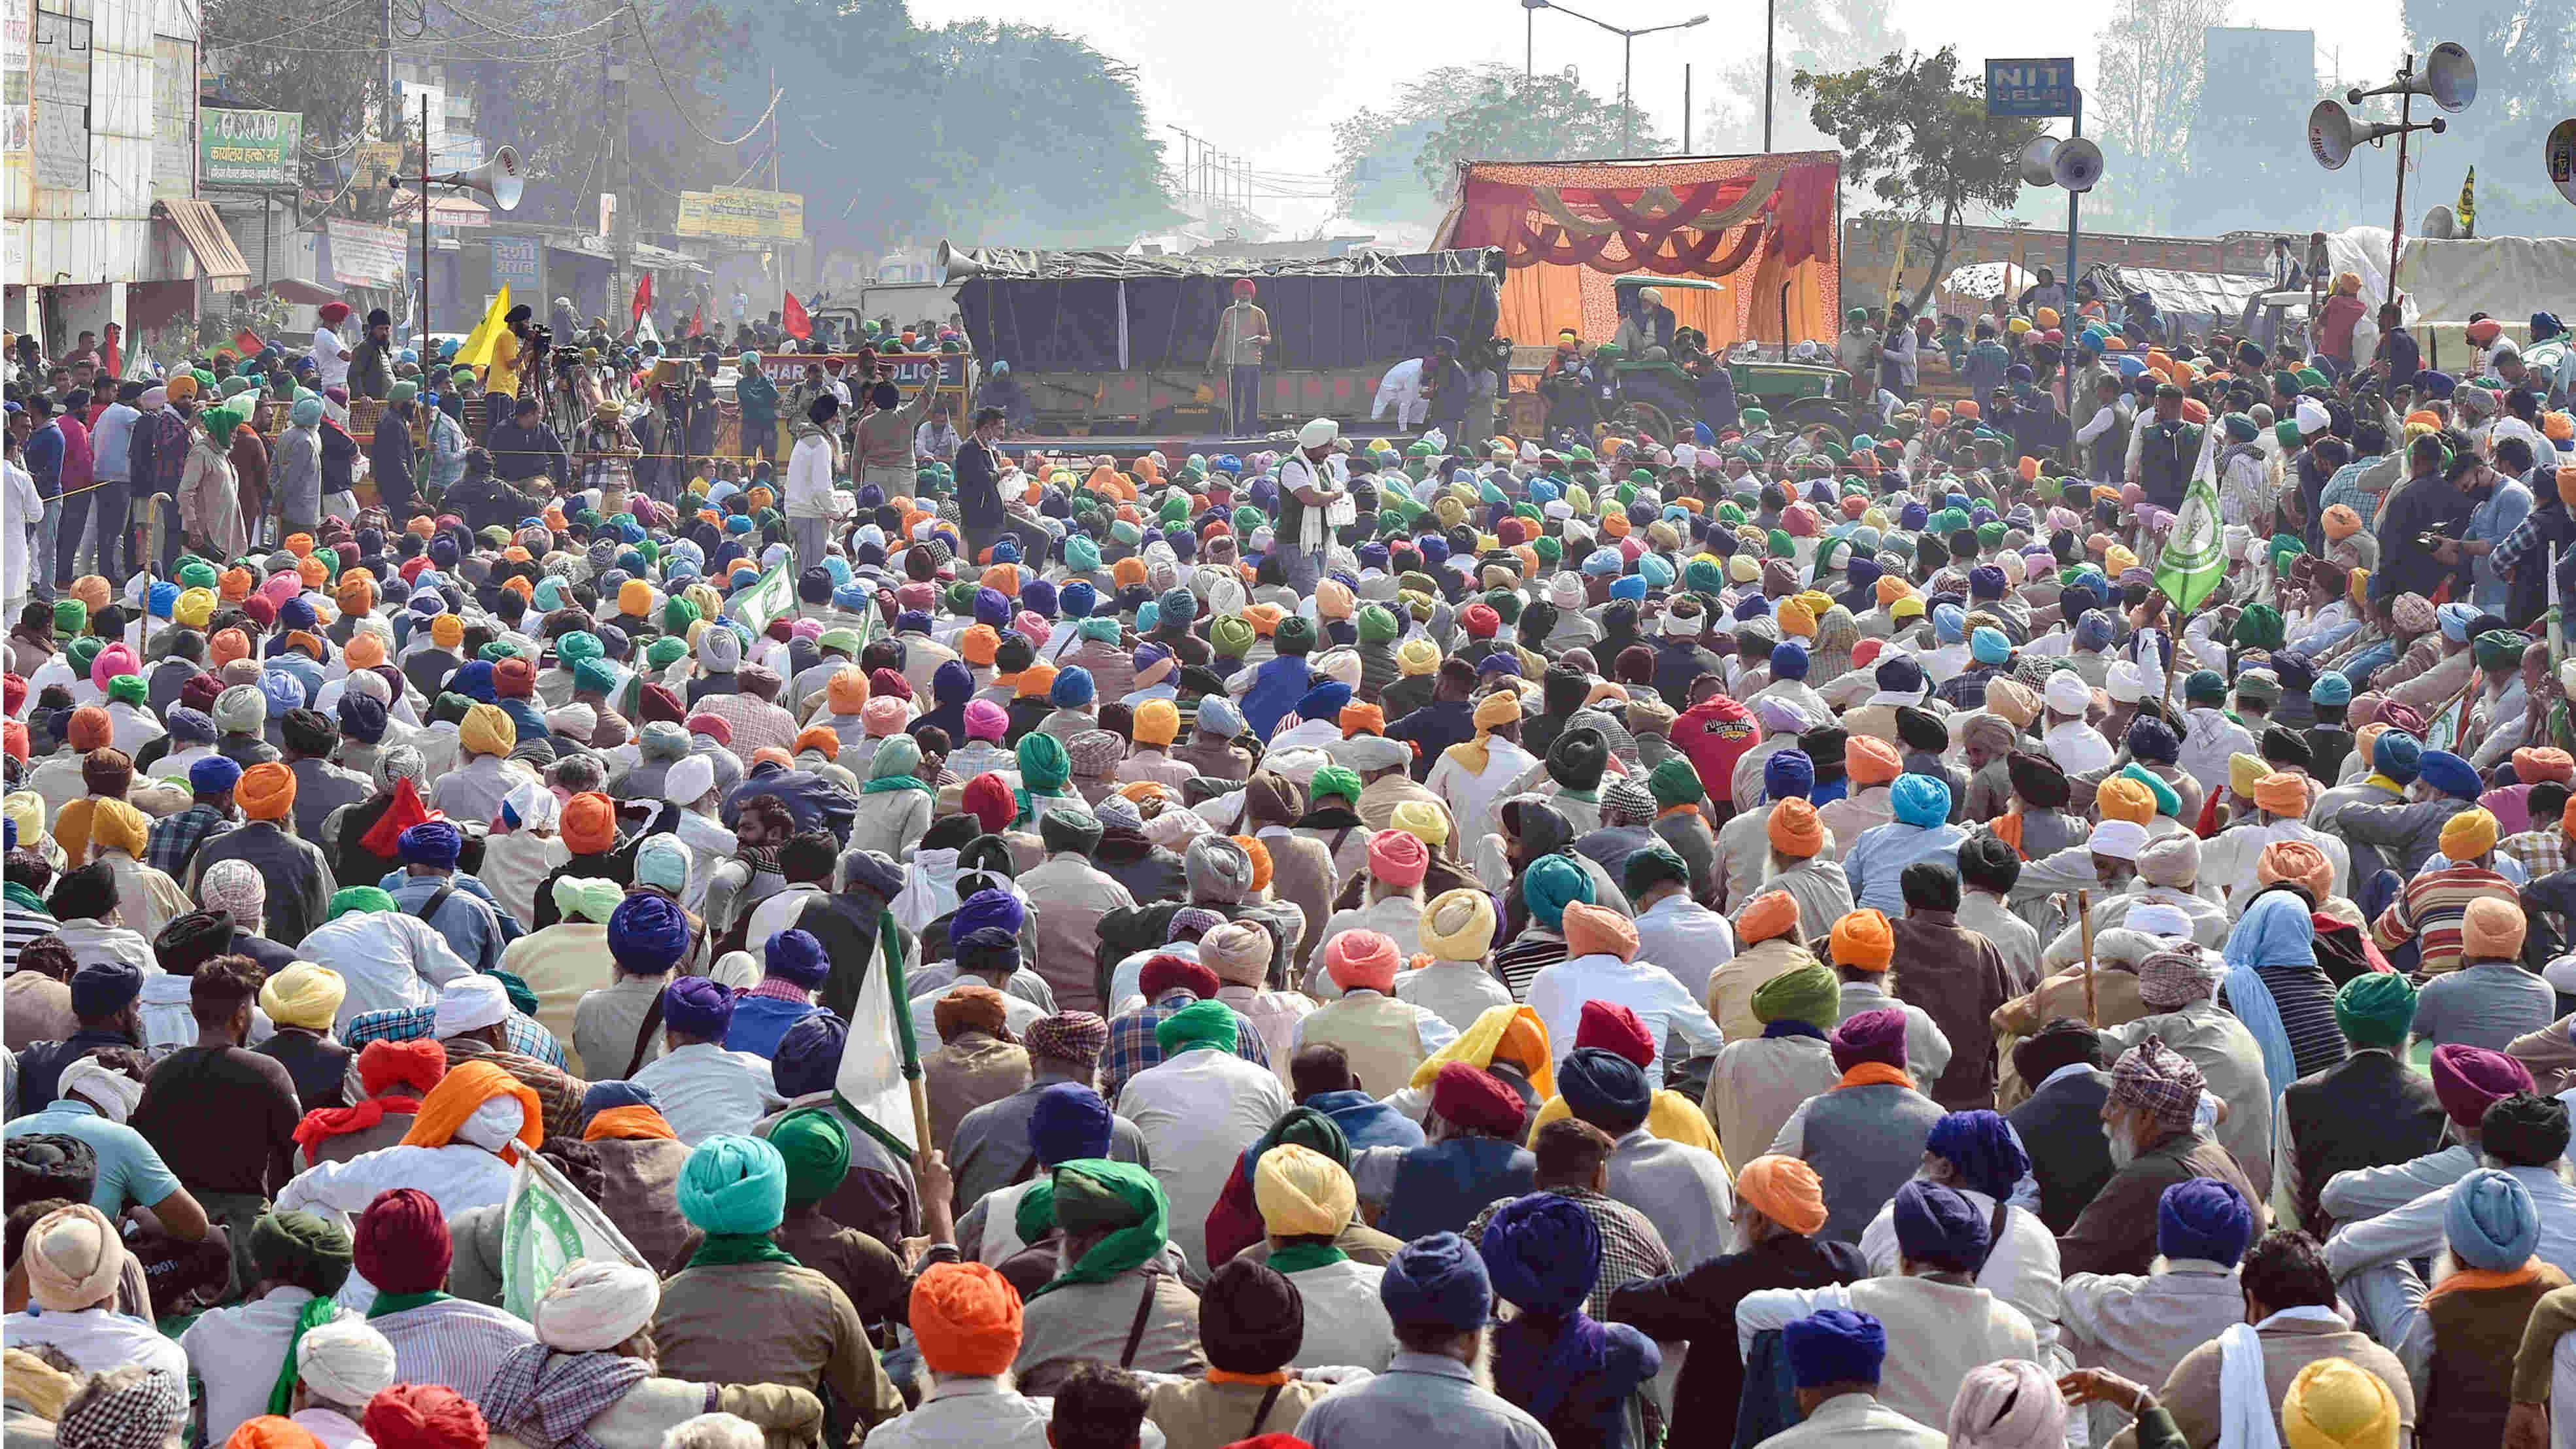 Protesting farmers reject Centre’s written offer of amendments in new farm laws